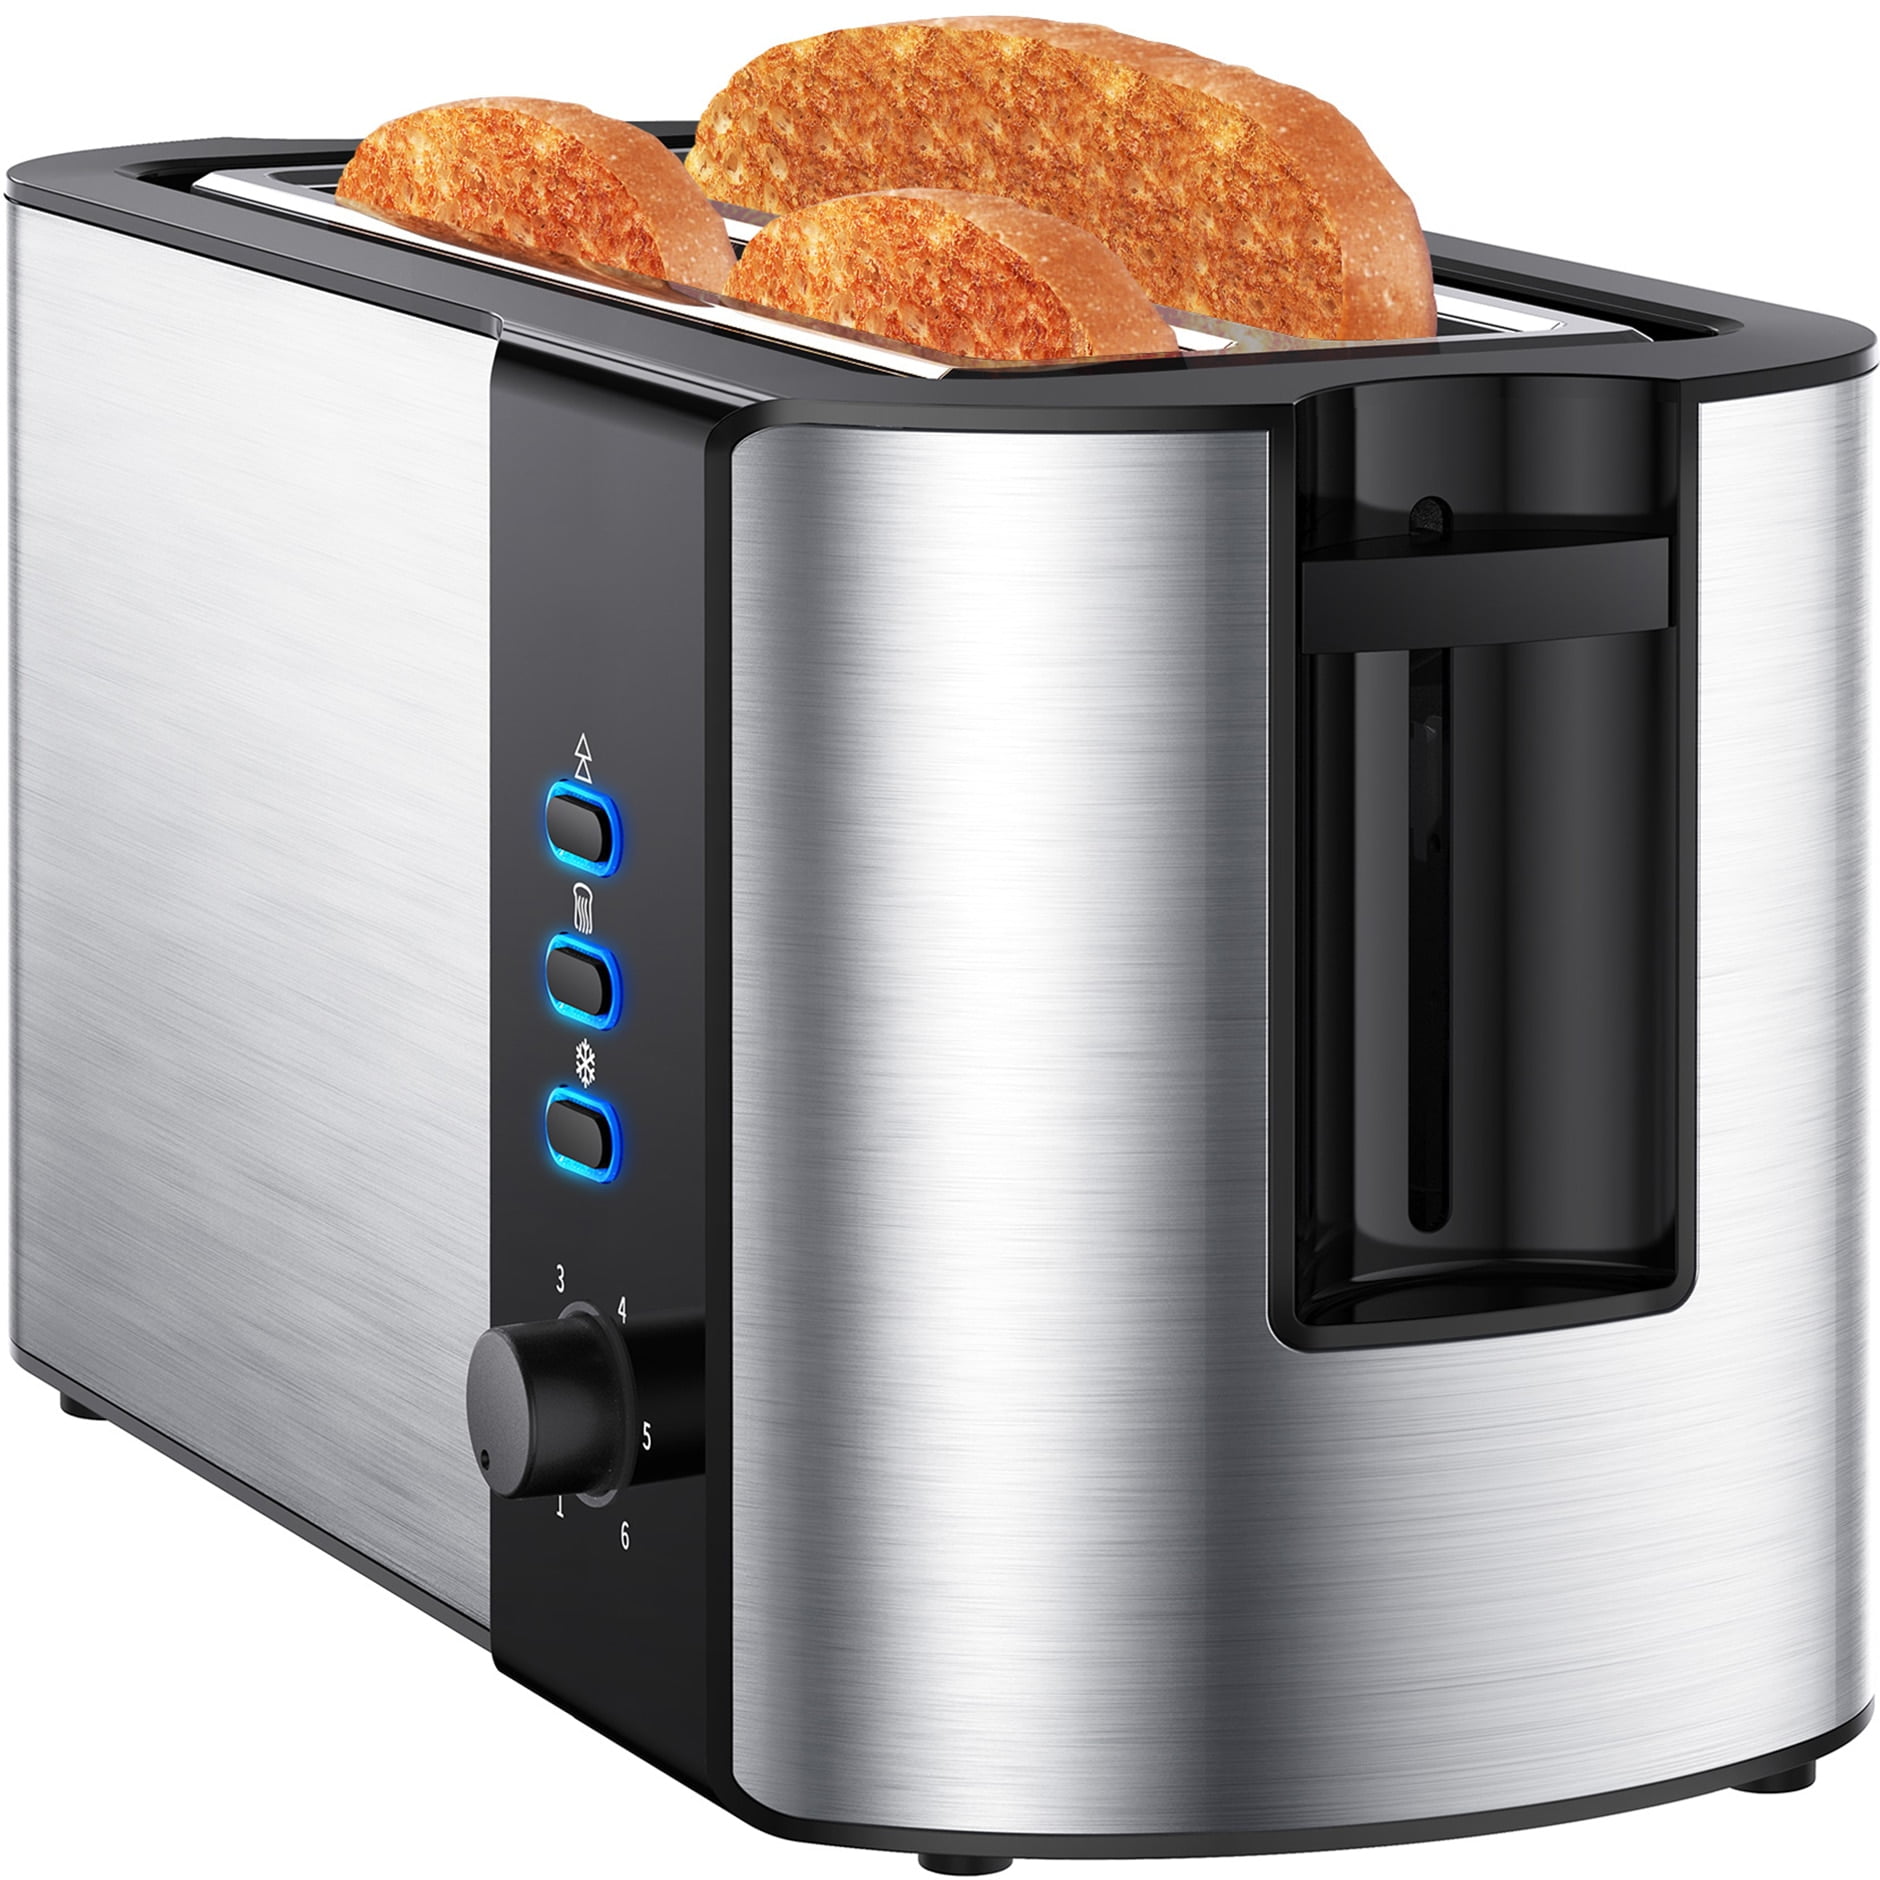 IKICH Toaster 4 Slice, Long Slot Toaster with Warming Rack, 6 Browning  Control, Reheat, Defrost, Compact Countertop Stainless Steel Toaster 4  Slice